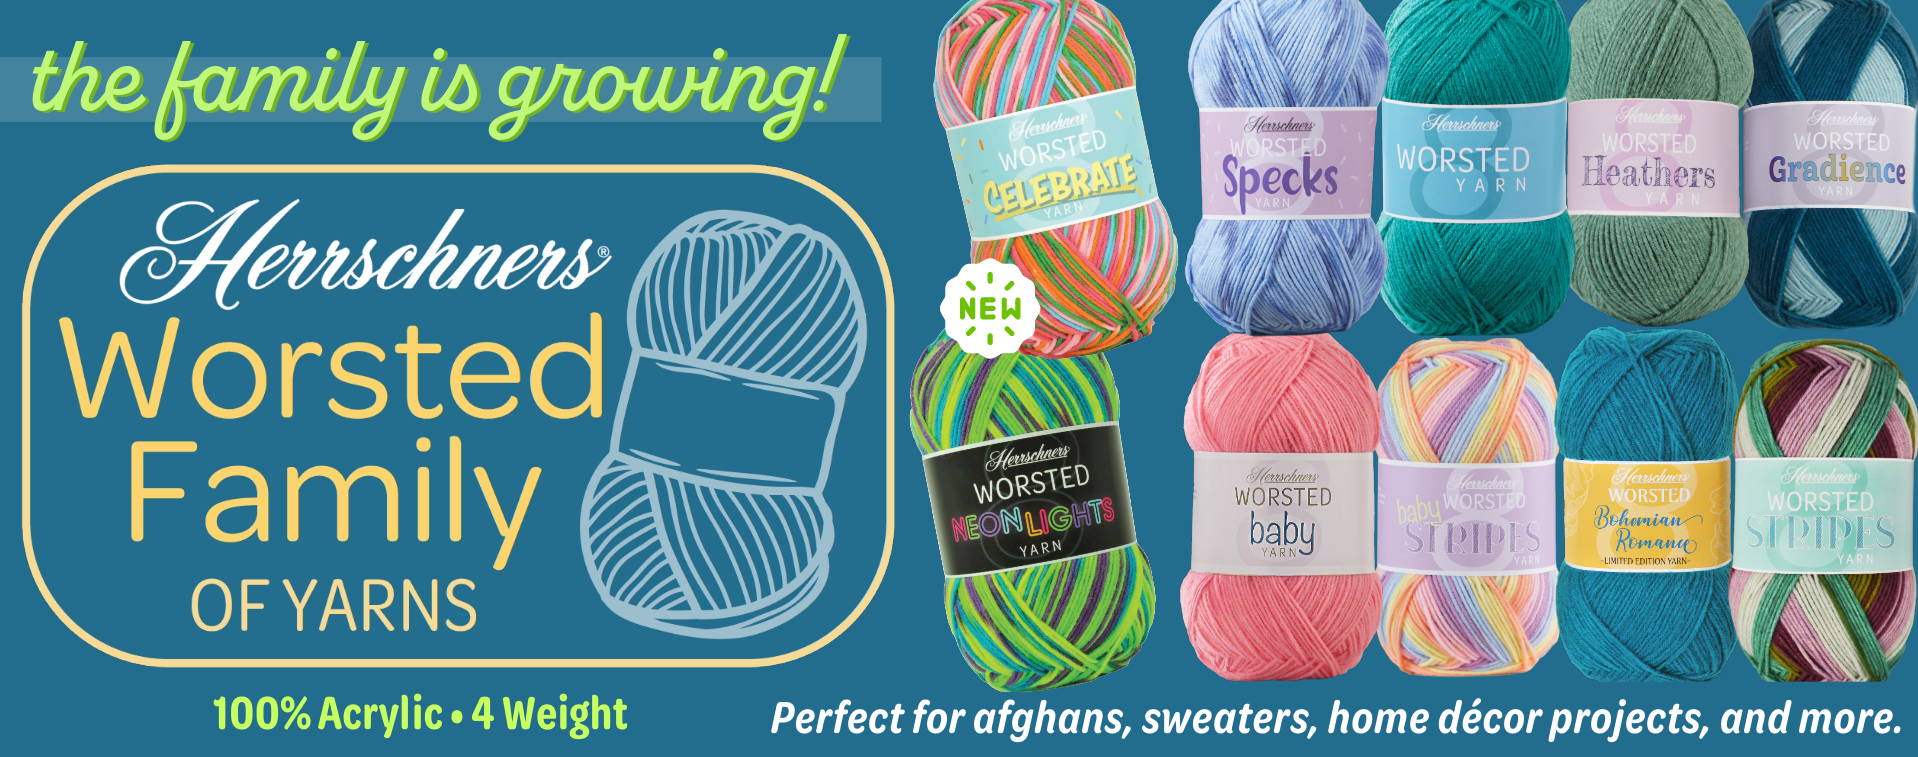 Herrschners Worsted Family of Yarns. Perfect for afghans, home decor, and more. Shop Now